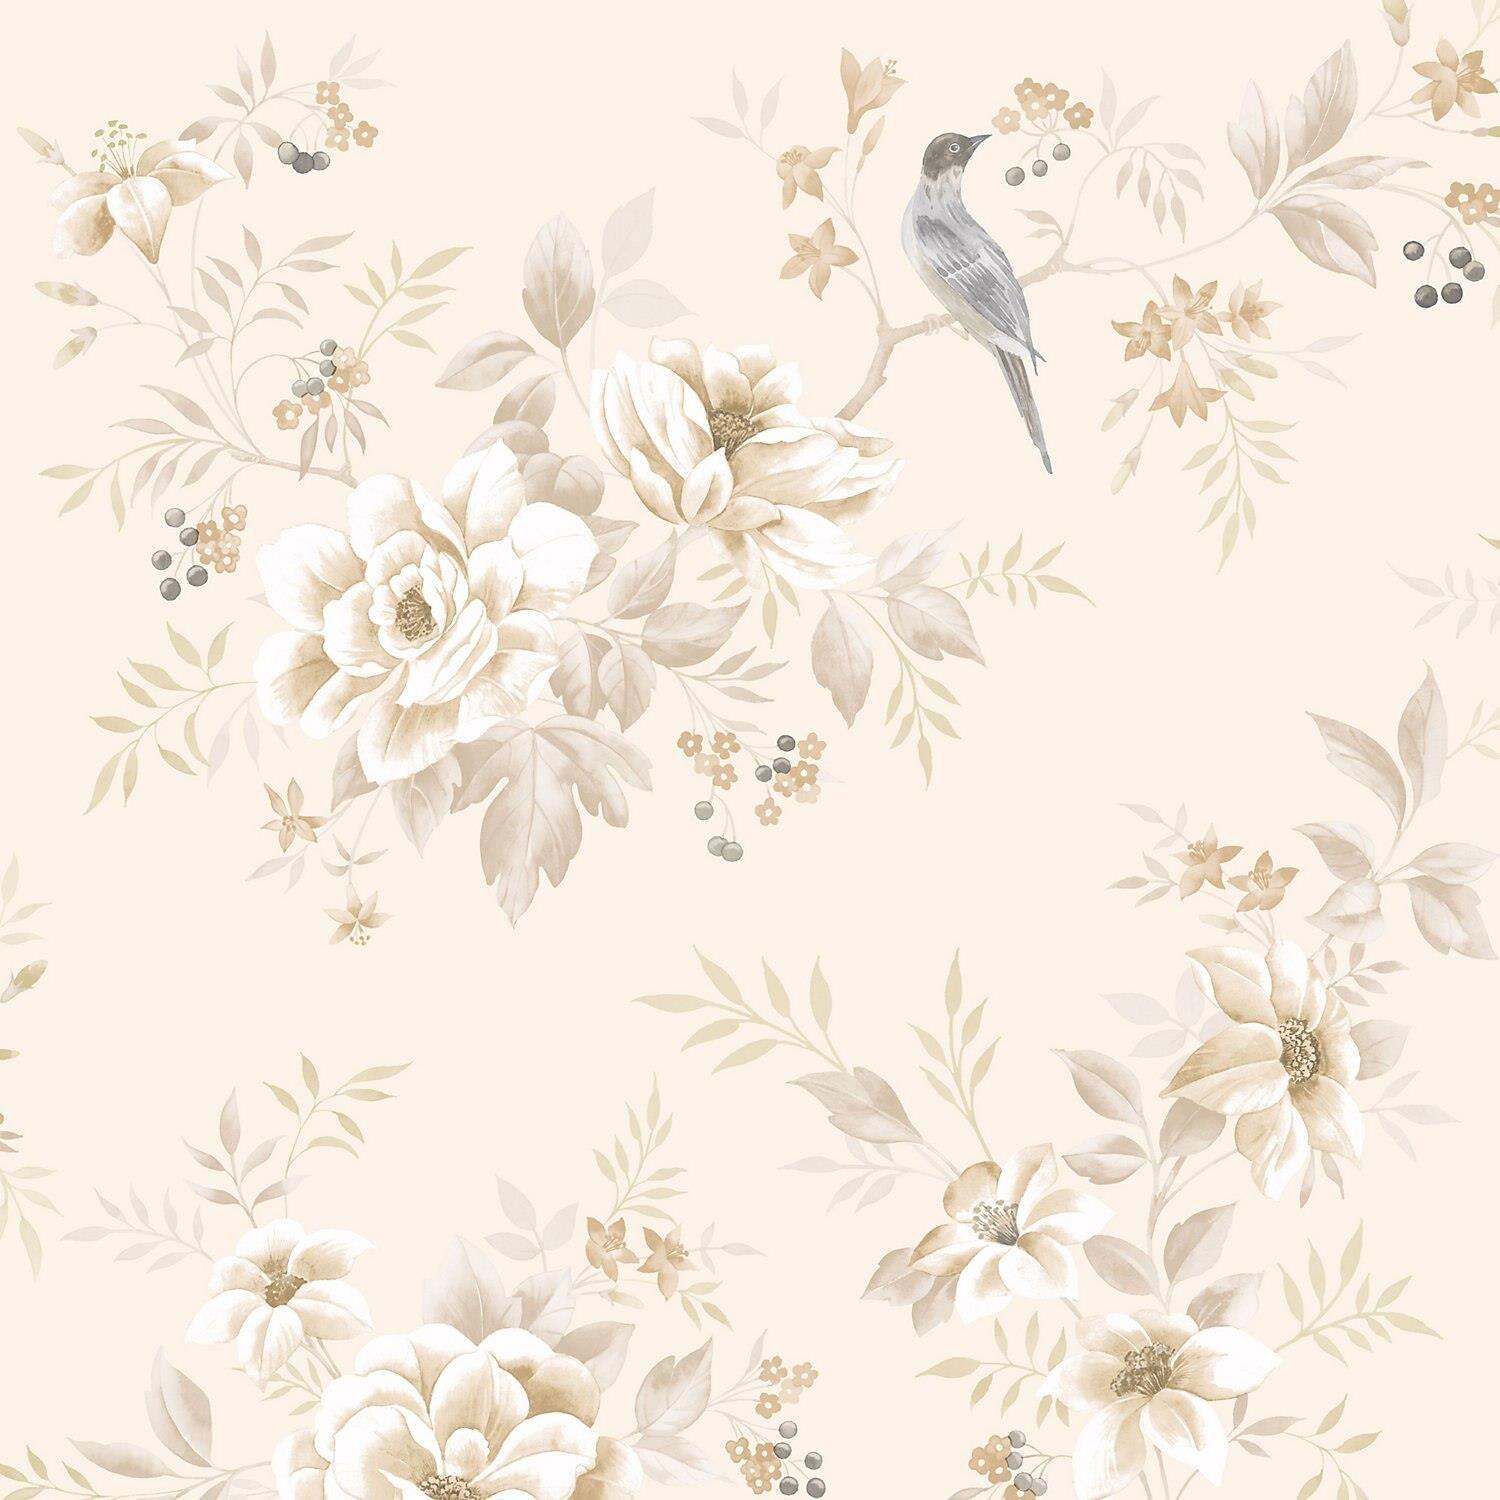 Aesthetic floral mobile wallpaper beige  Free Photo  rawpixel